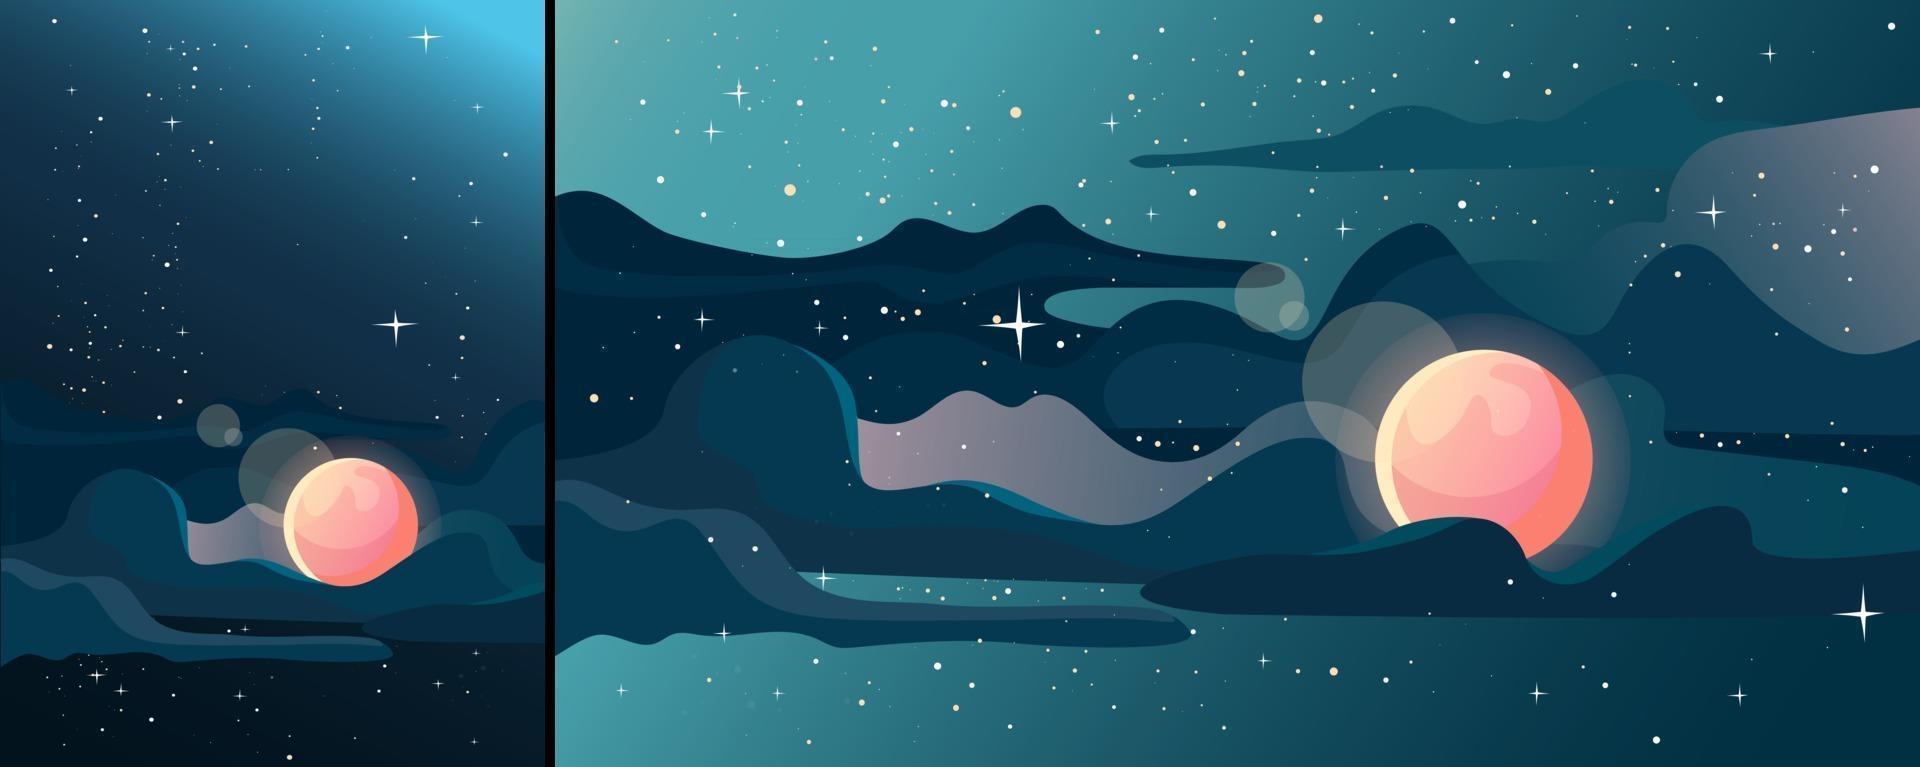 Starry sky with moon in vertical and horizontal orientation vector